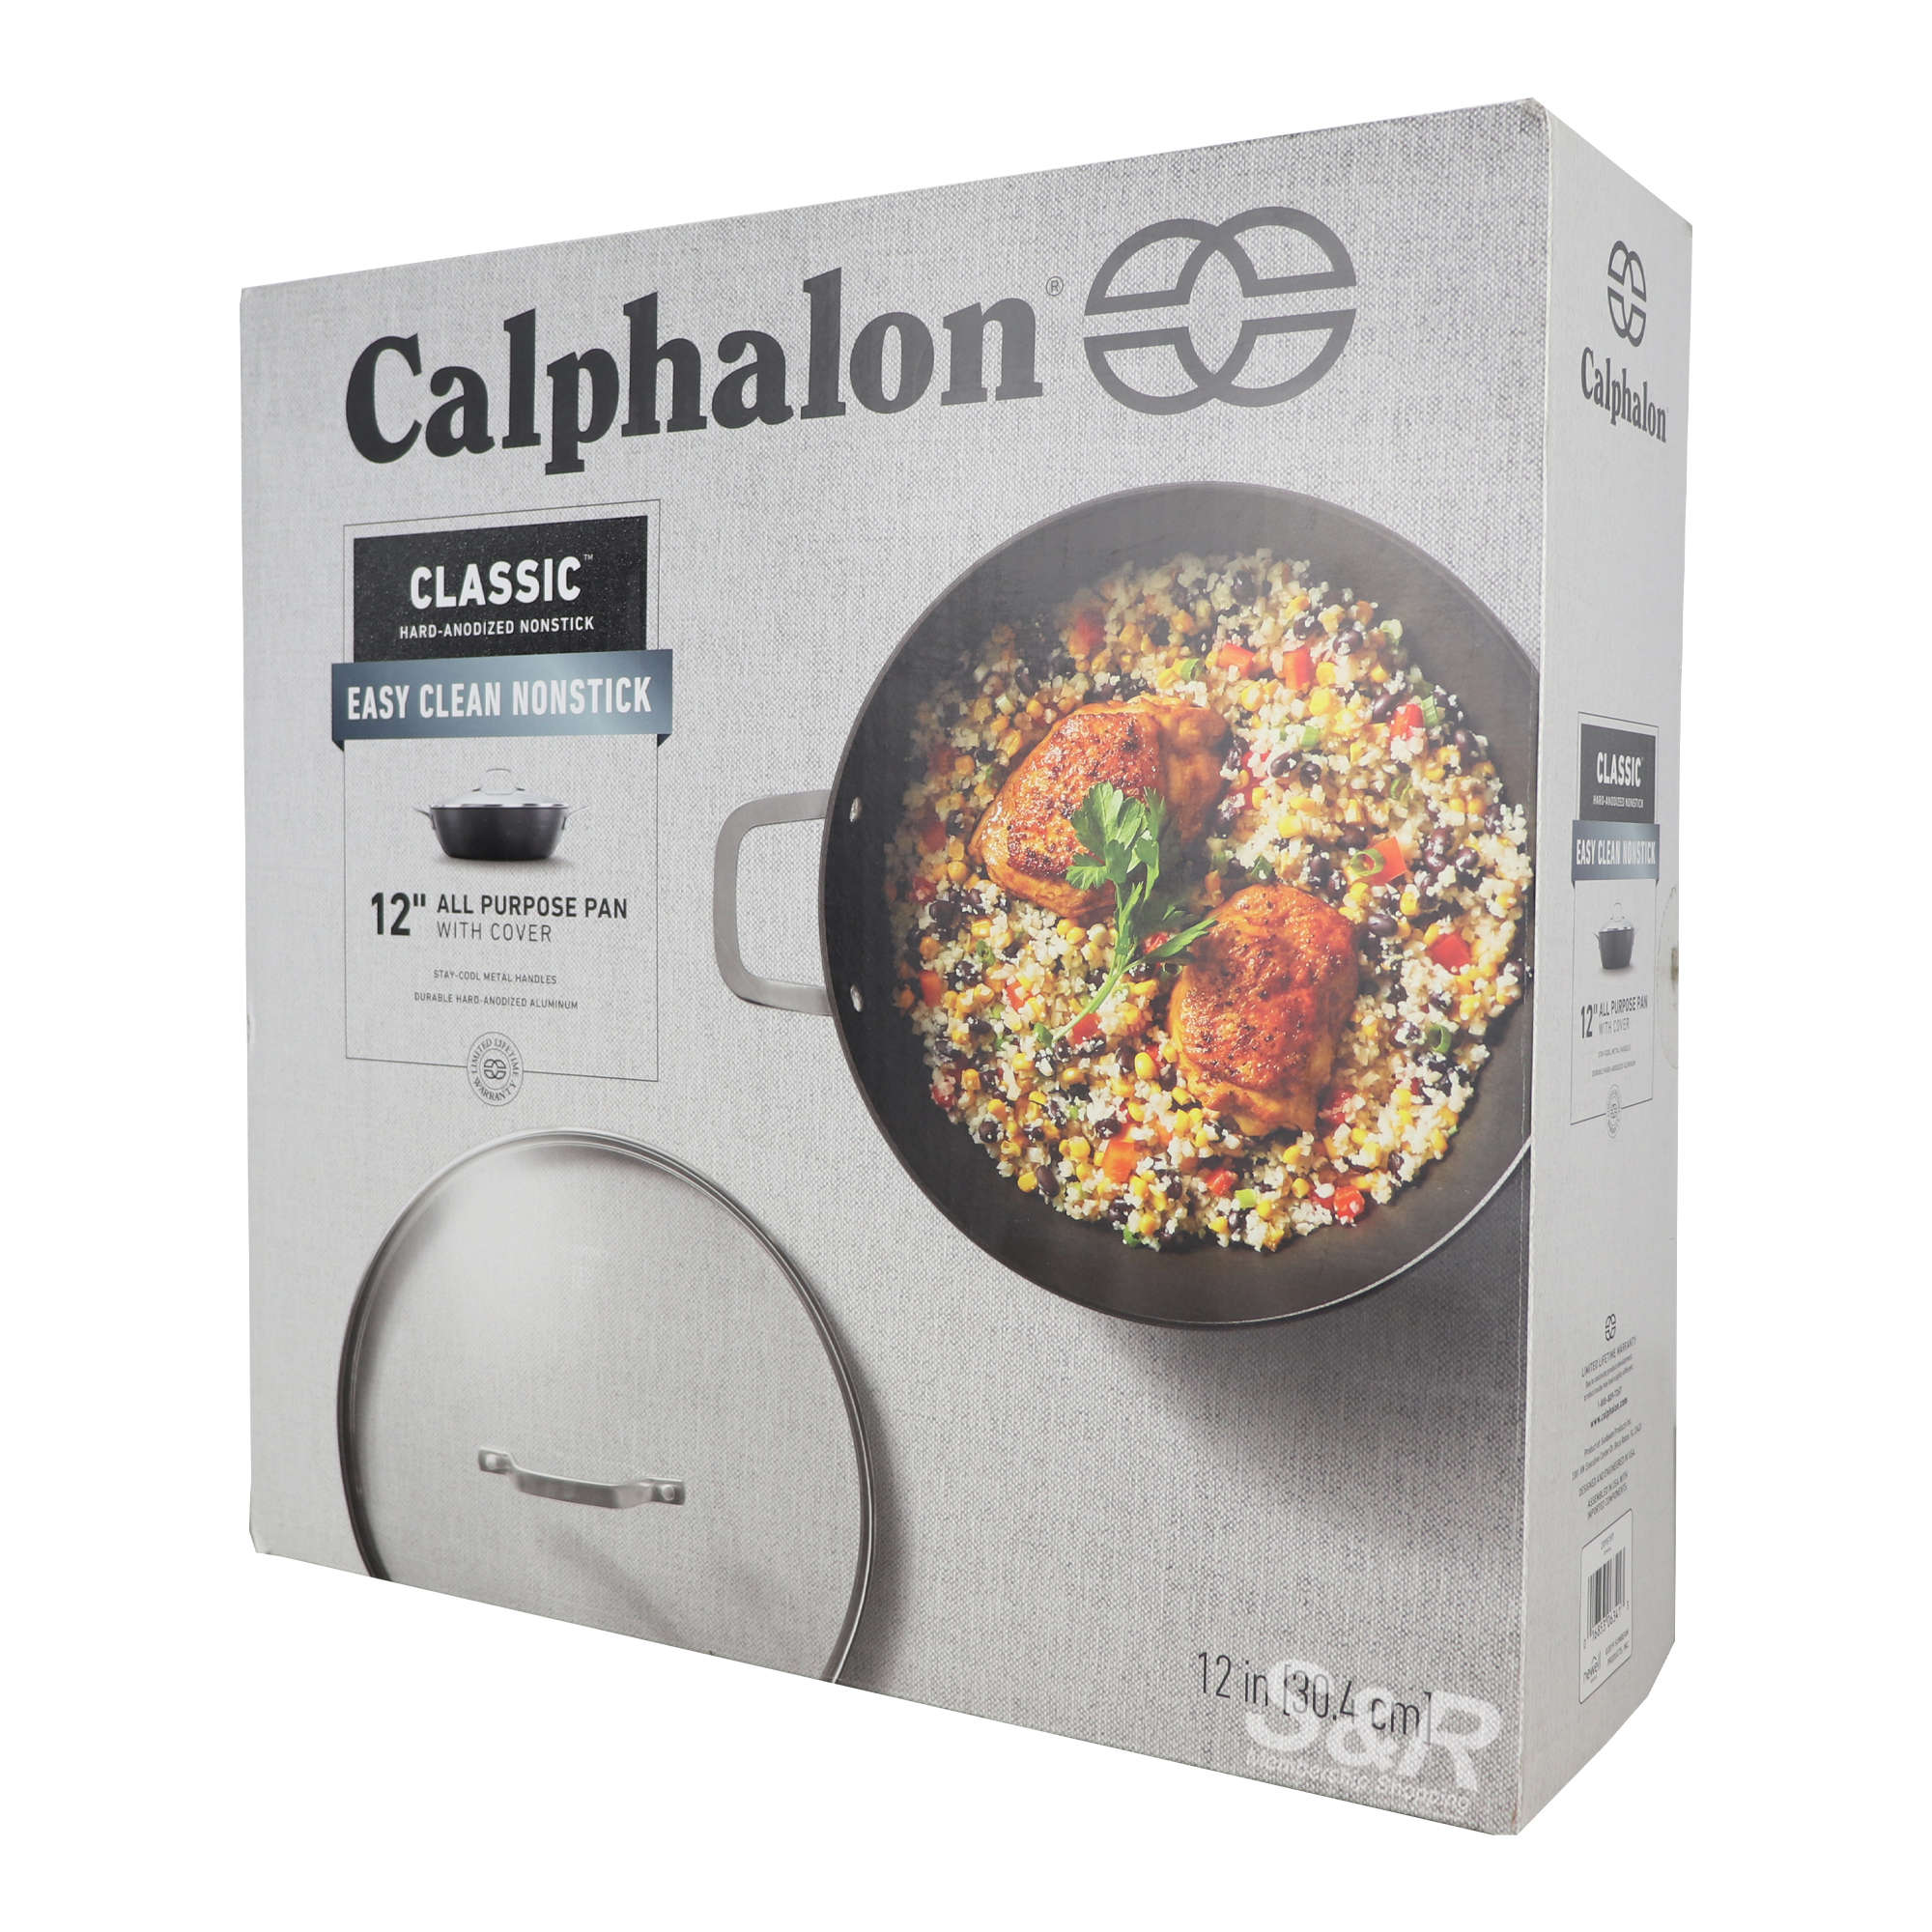 Calphalon 12in All Purpose Pan with Cover